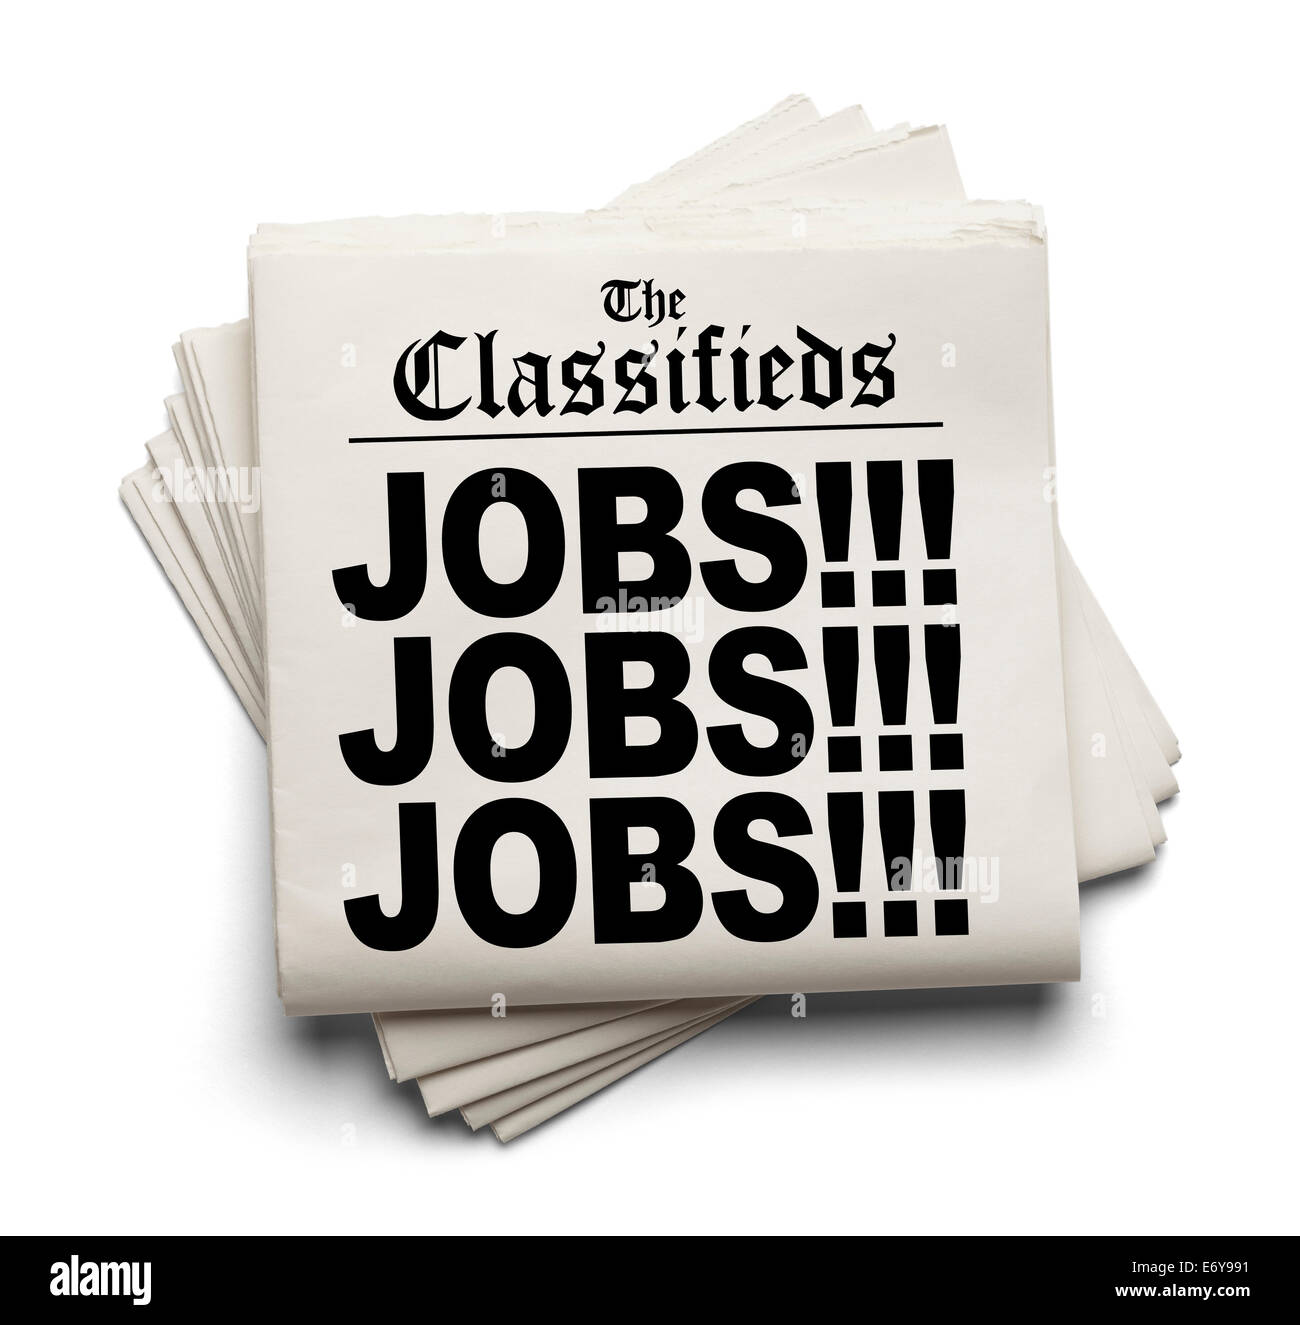 Newspaper Classifieds Jobs Headline Isolated on White Background. Stock Photo